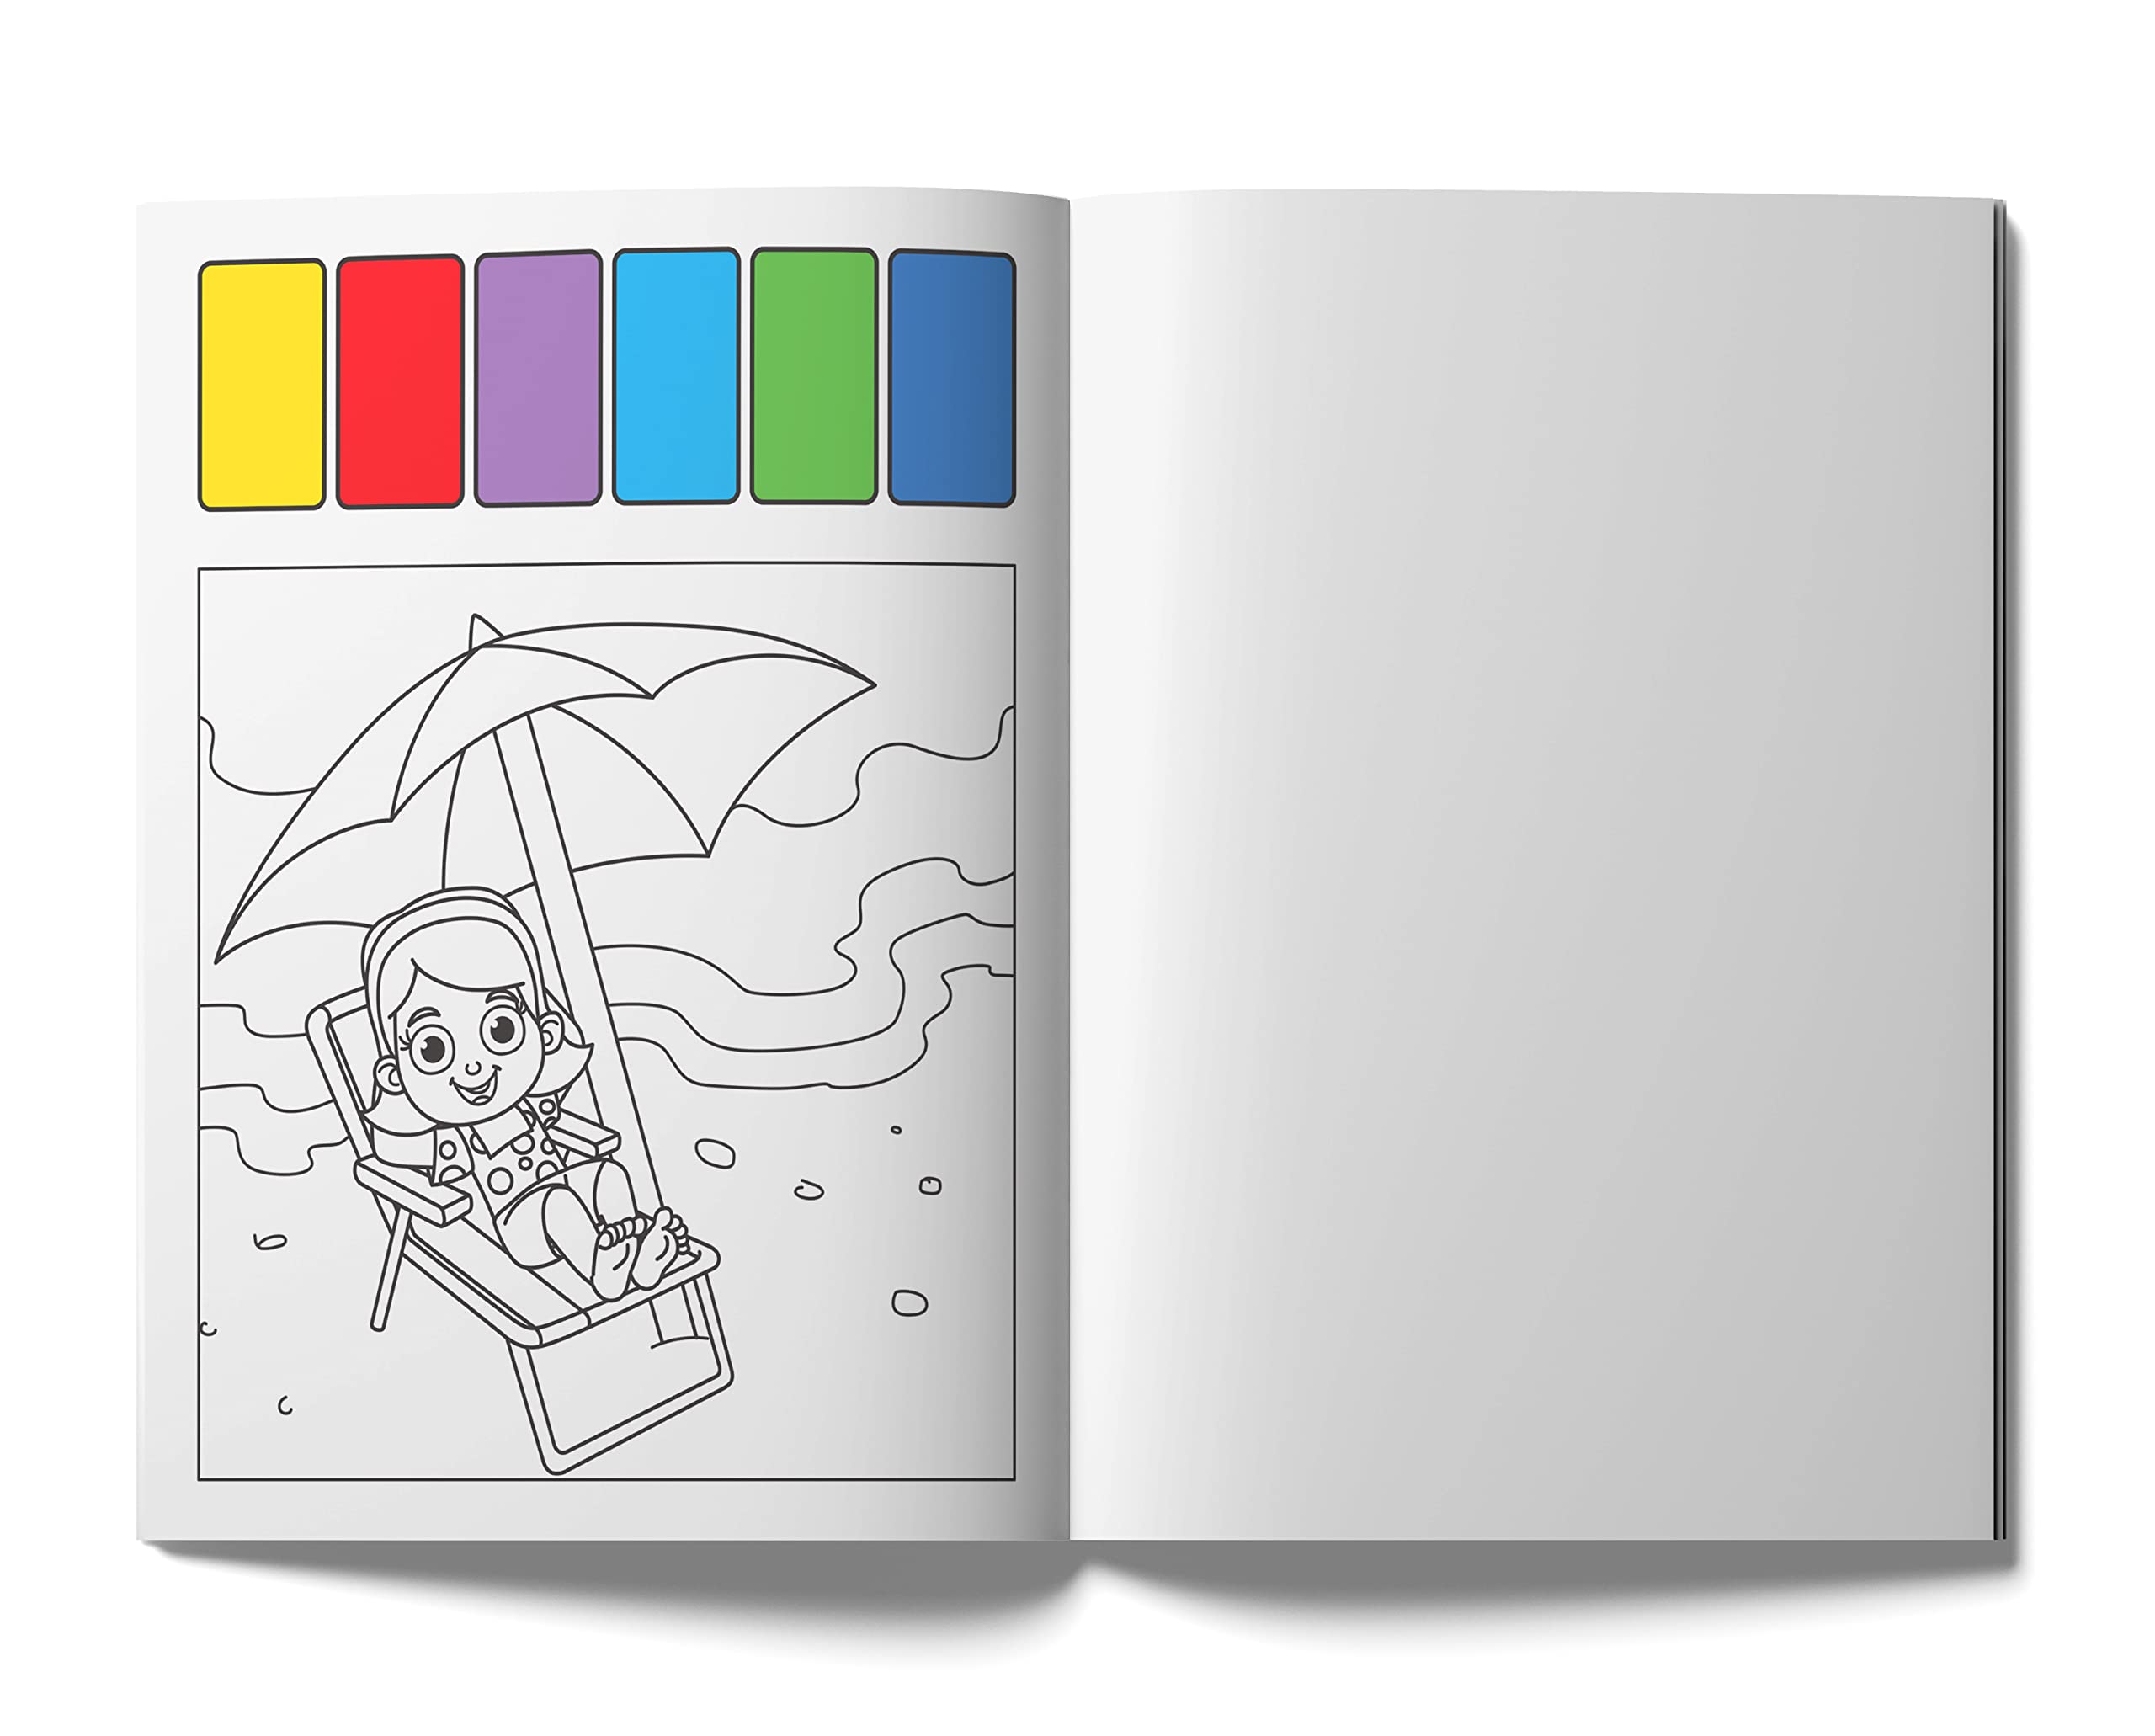 Pick and Paint Beach Fun Coloring Activity Book